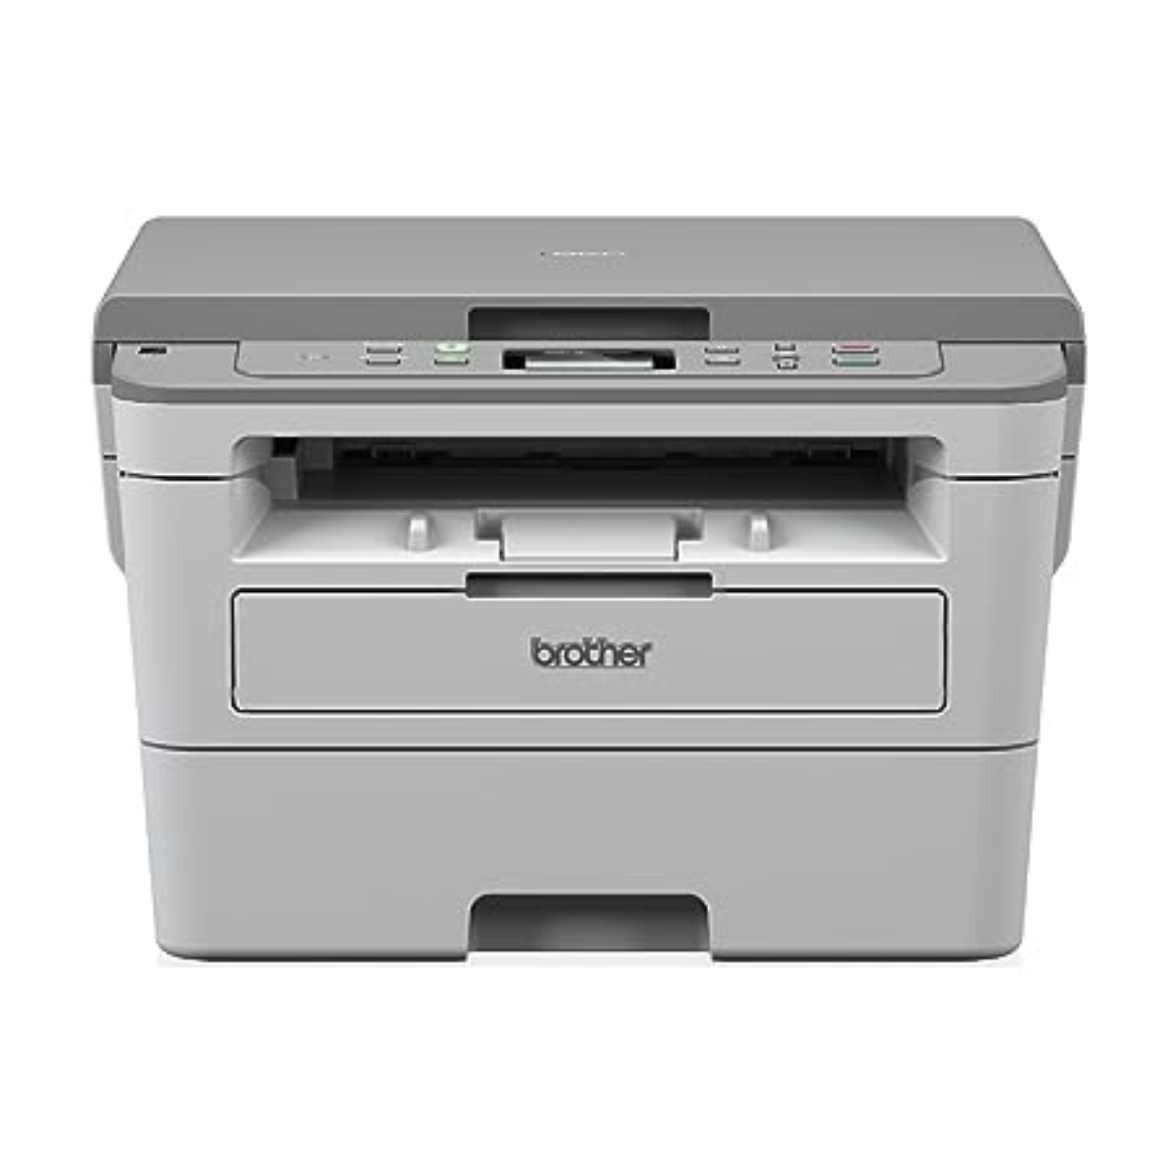 Picture of Brother Multi-Function Monochrome Laser Printer with Auto Duplex Printing -  DCP-B7500D